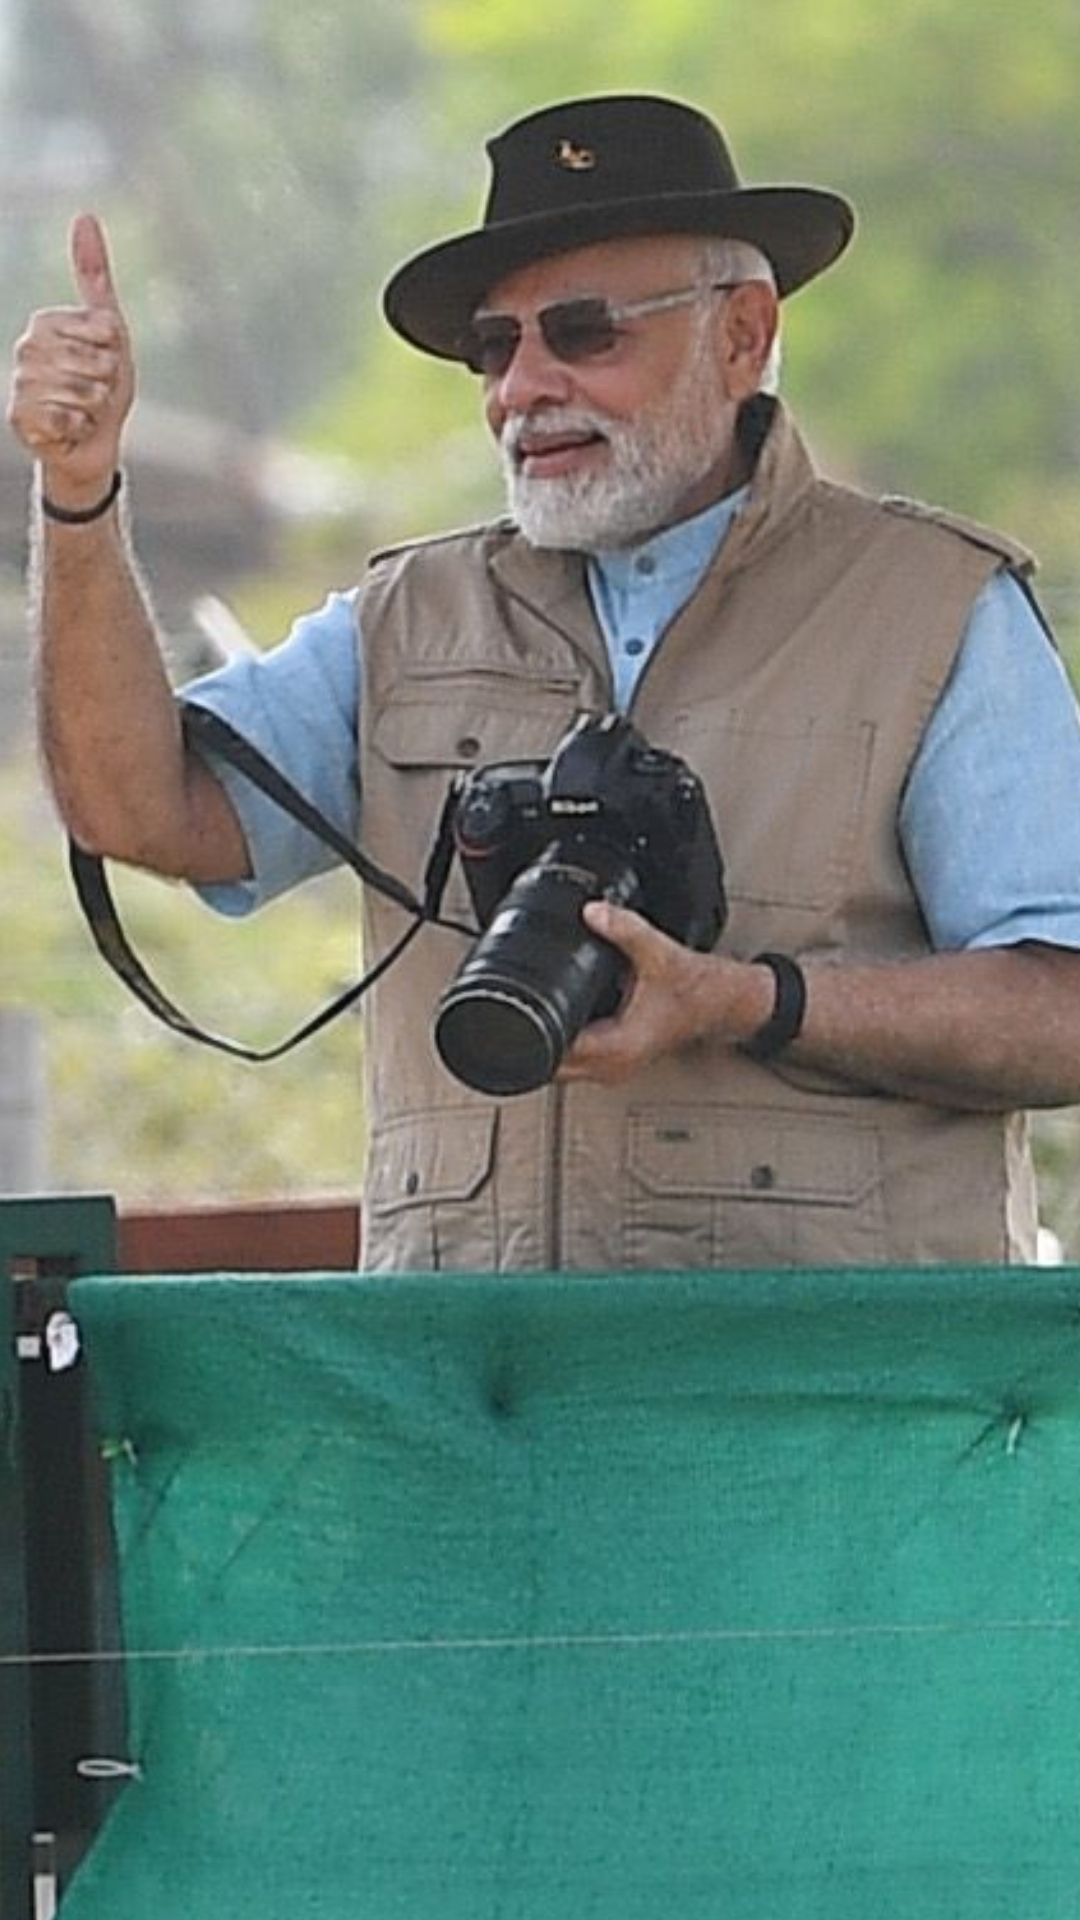 On his 72nd birthday, PM Narendra Modi was seen wearing a blue kurta pyjama that he paired with black shades and black shoes. While releasing the cheetahs, he carried an adventure gilet sleeveless Jacket and a hat to complement his adventurous look.